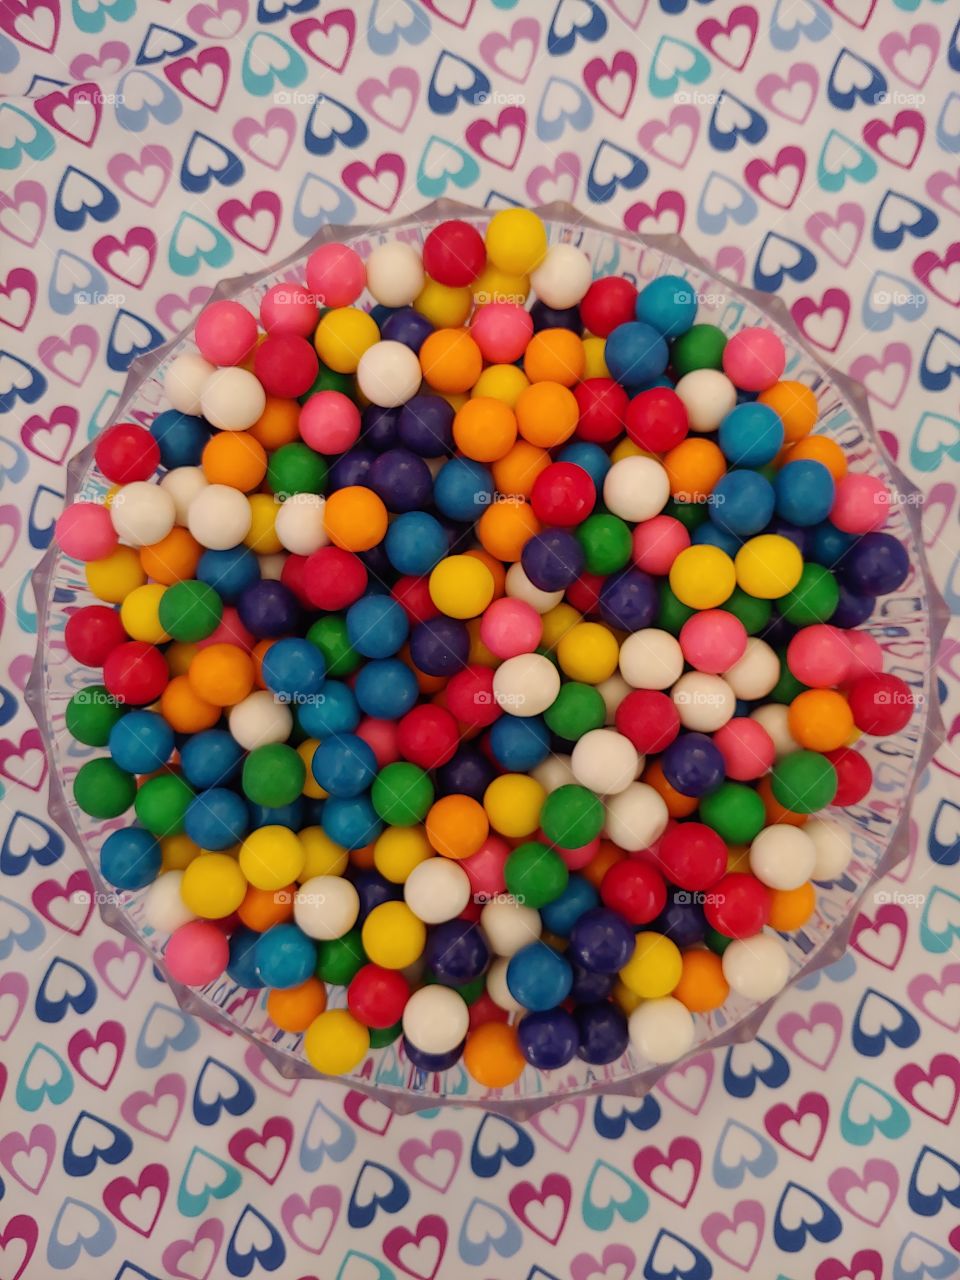 Rainbow Colored Gumballs in A Bowl surrounded by Hearts